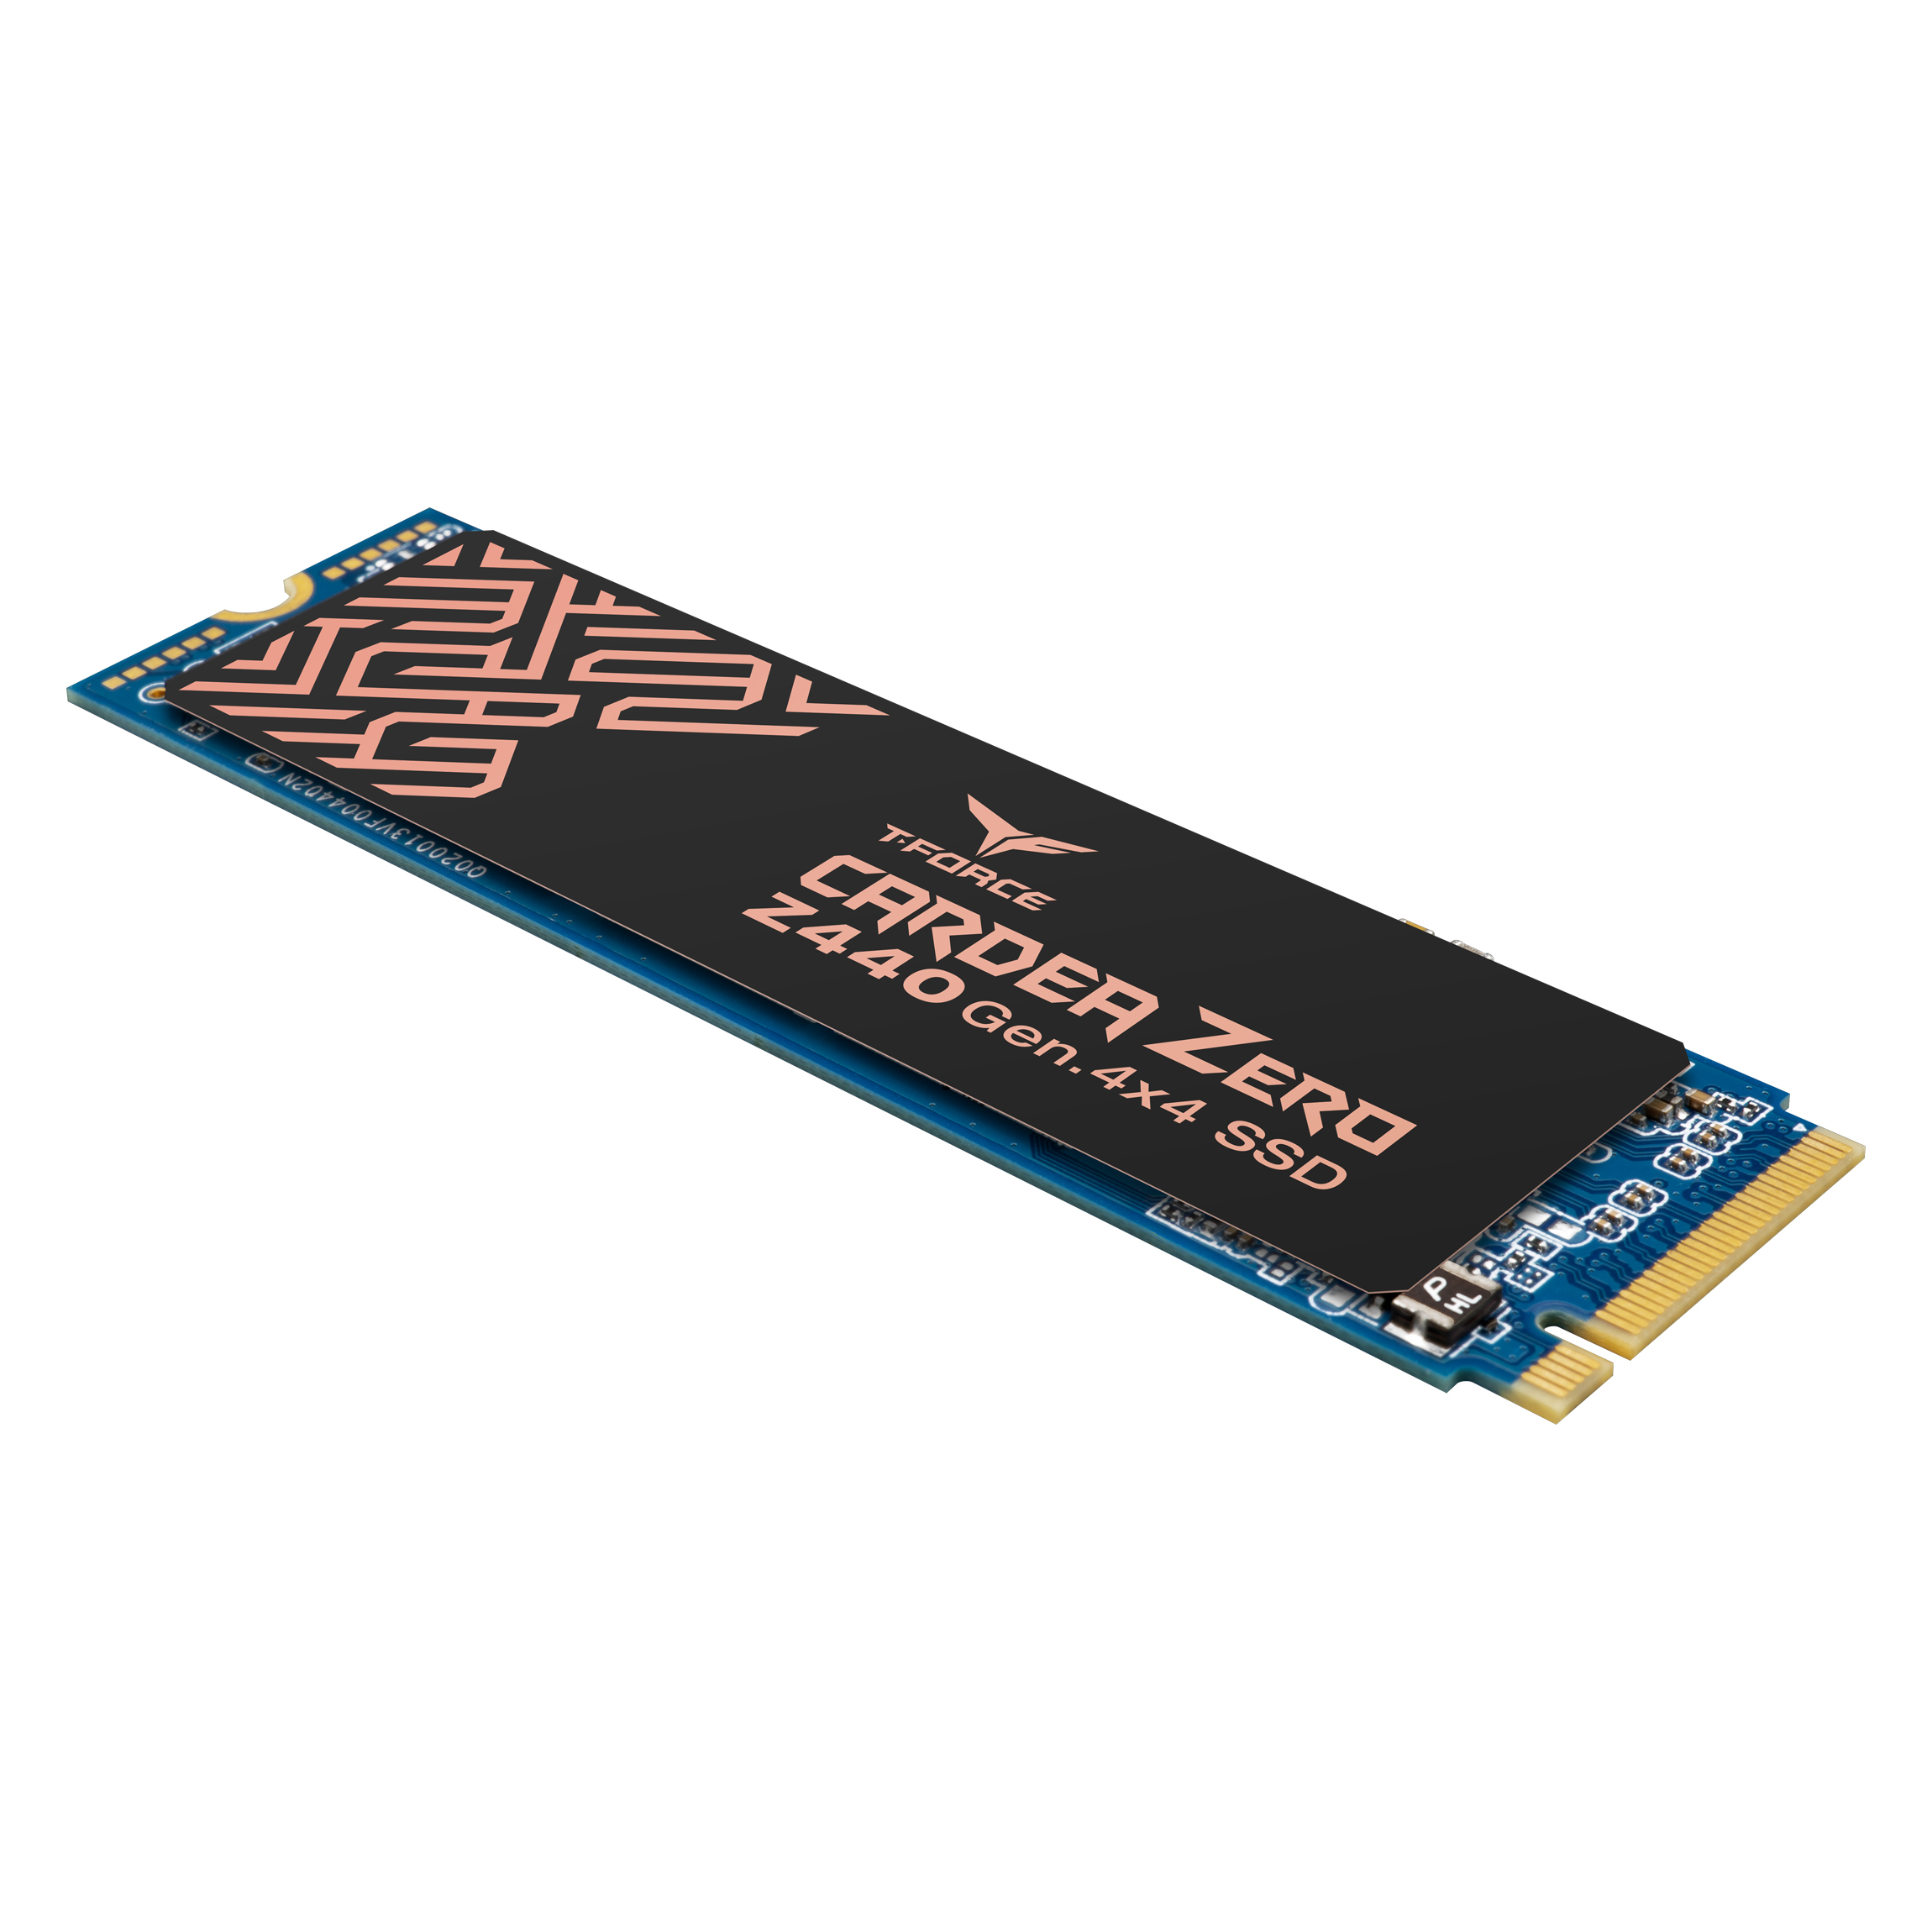 Team Group - TeamGroup T-Force Cardea Zero Z440 1TB NVMe PCIe Gen4 M.2 Solid State Drive